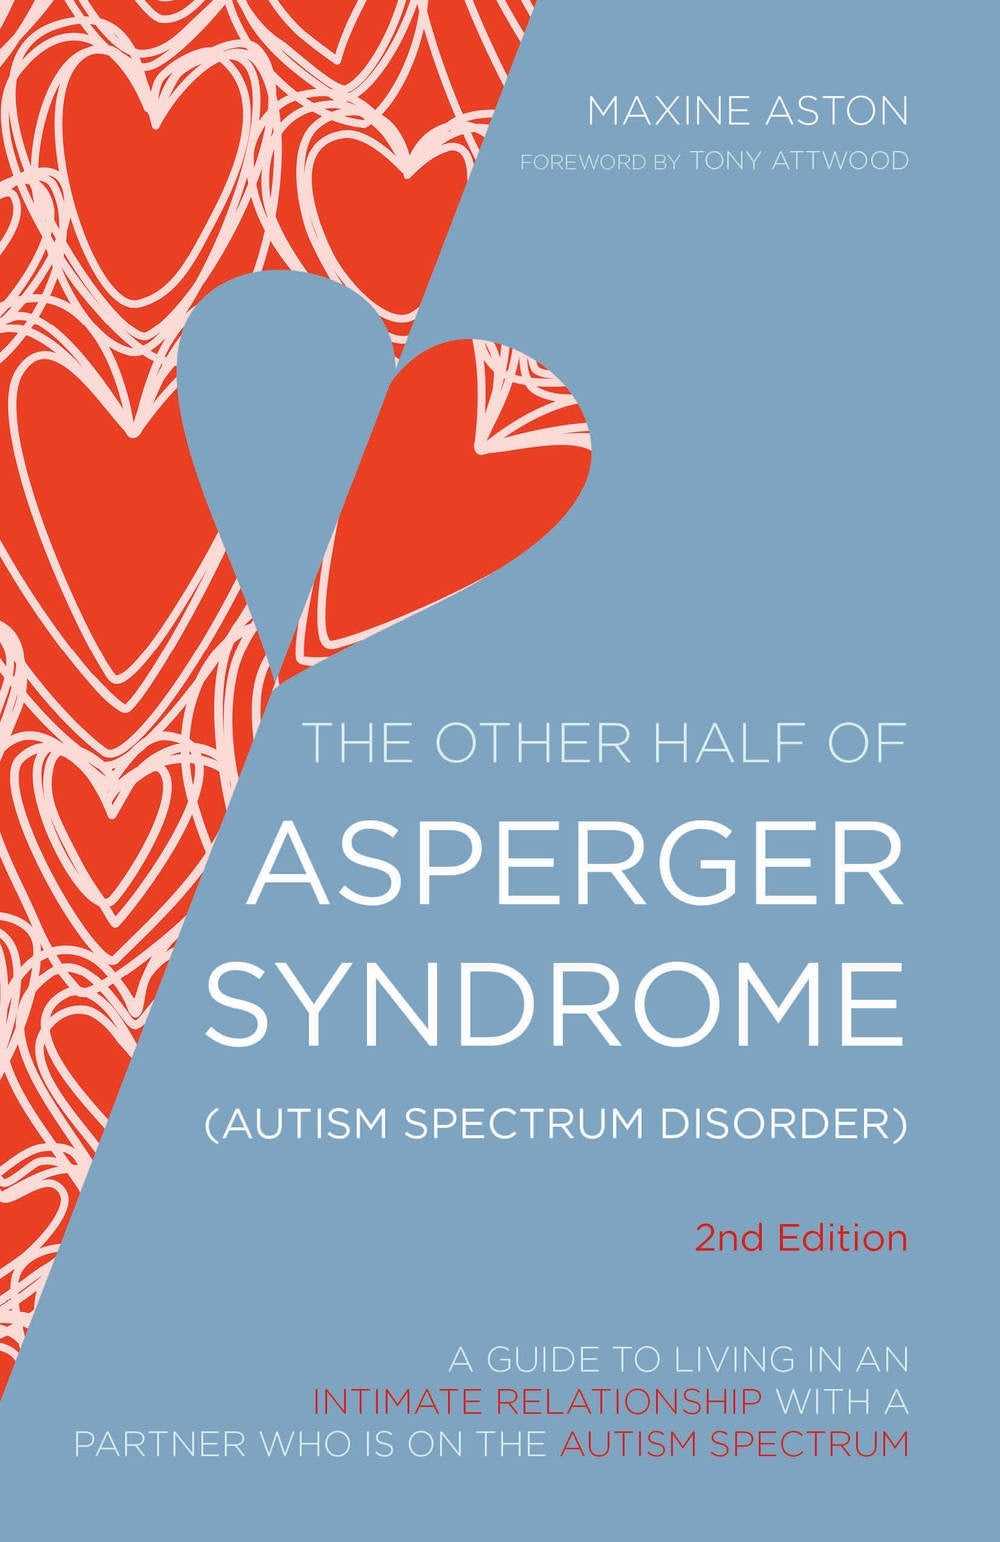 The Other Half of Asperger Syndrome (Autism Spectrum Disorder) by Dr Anthony Attwood, Maxine Aston